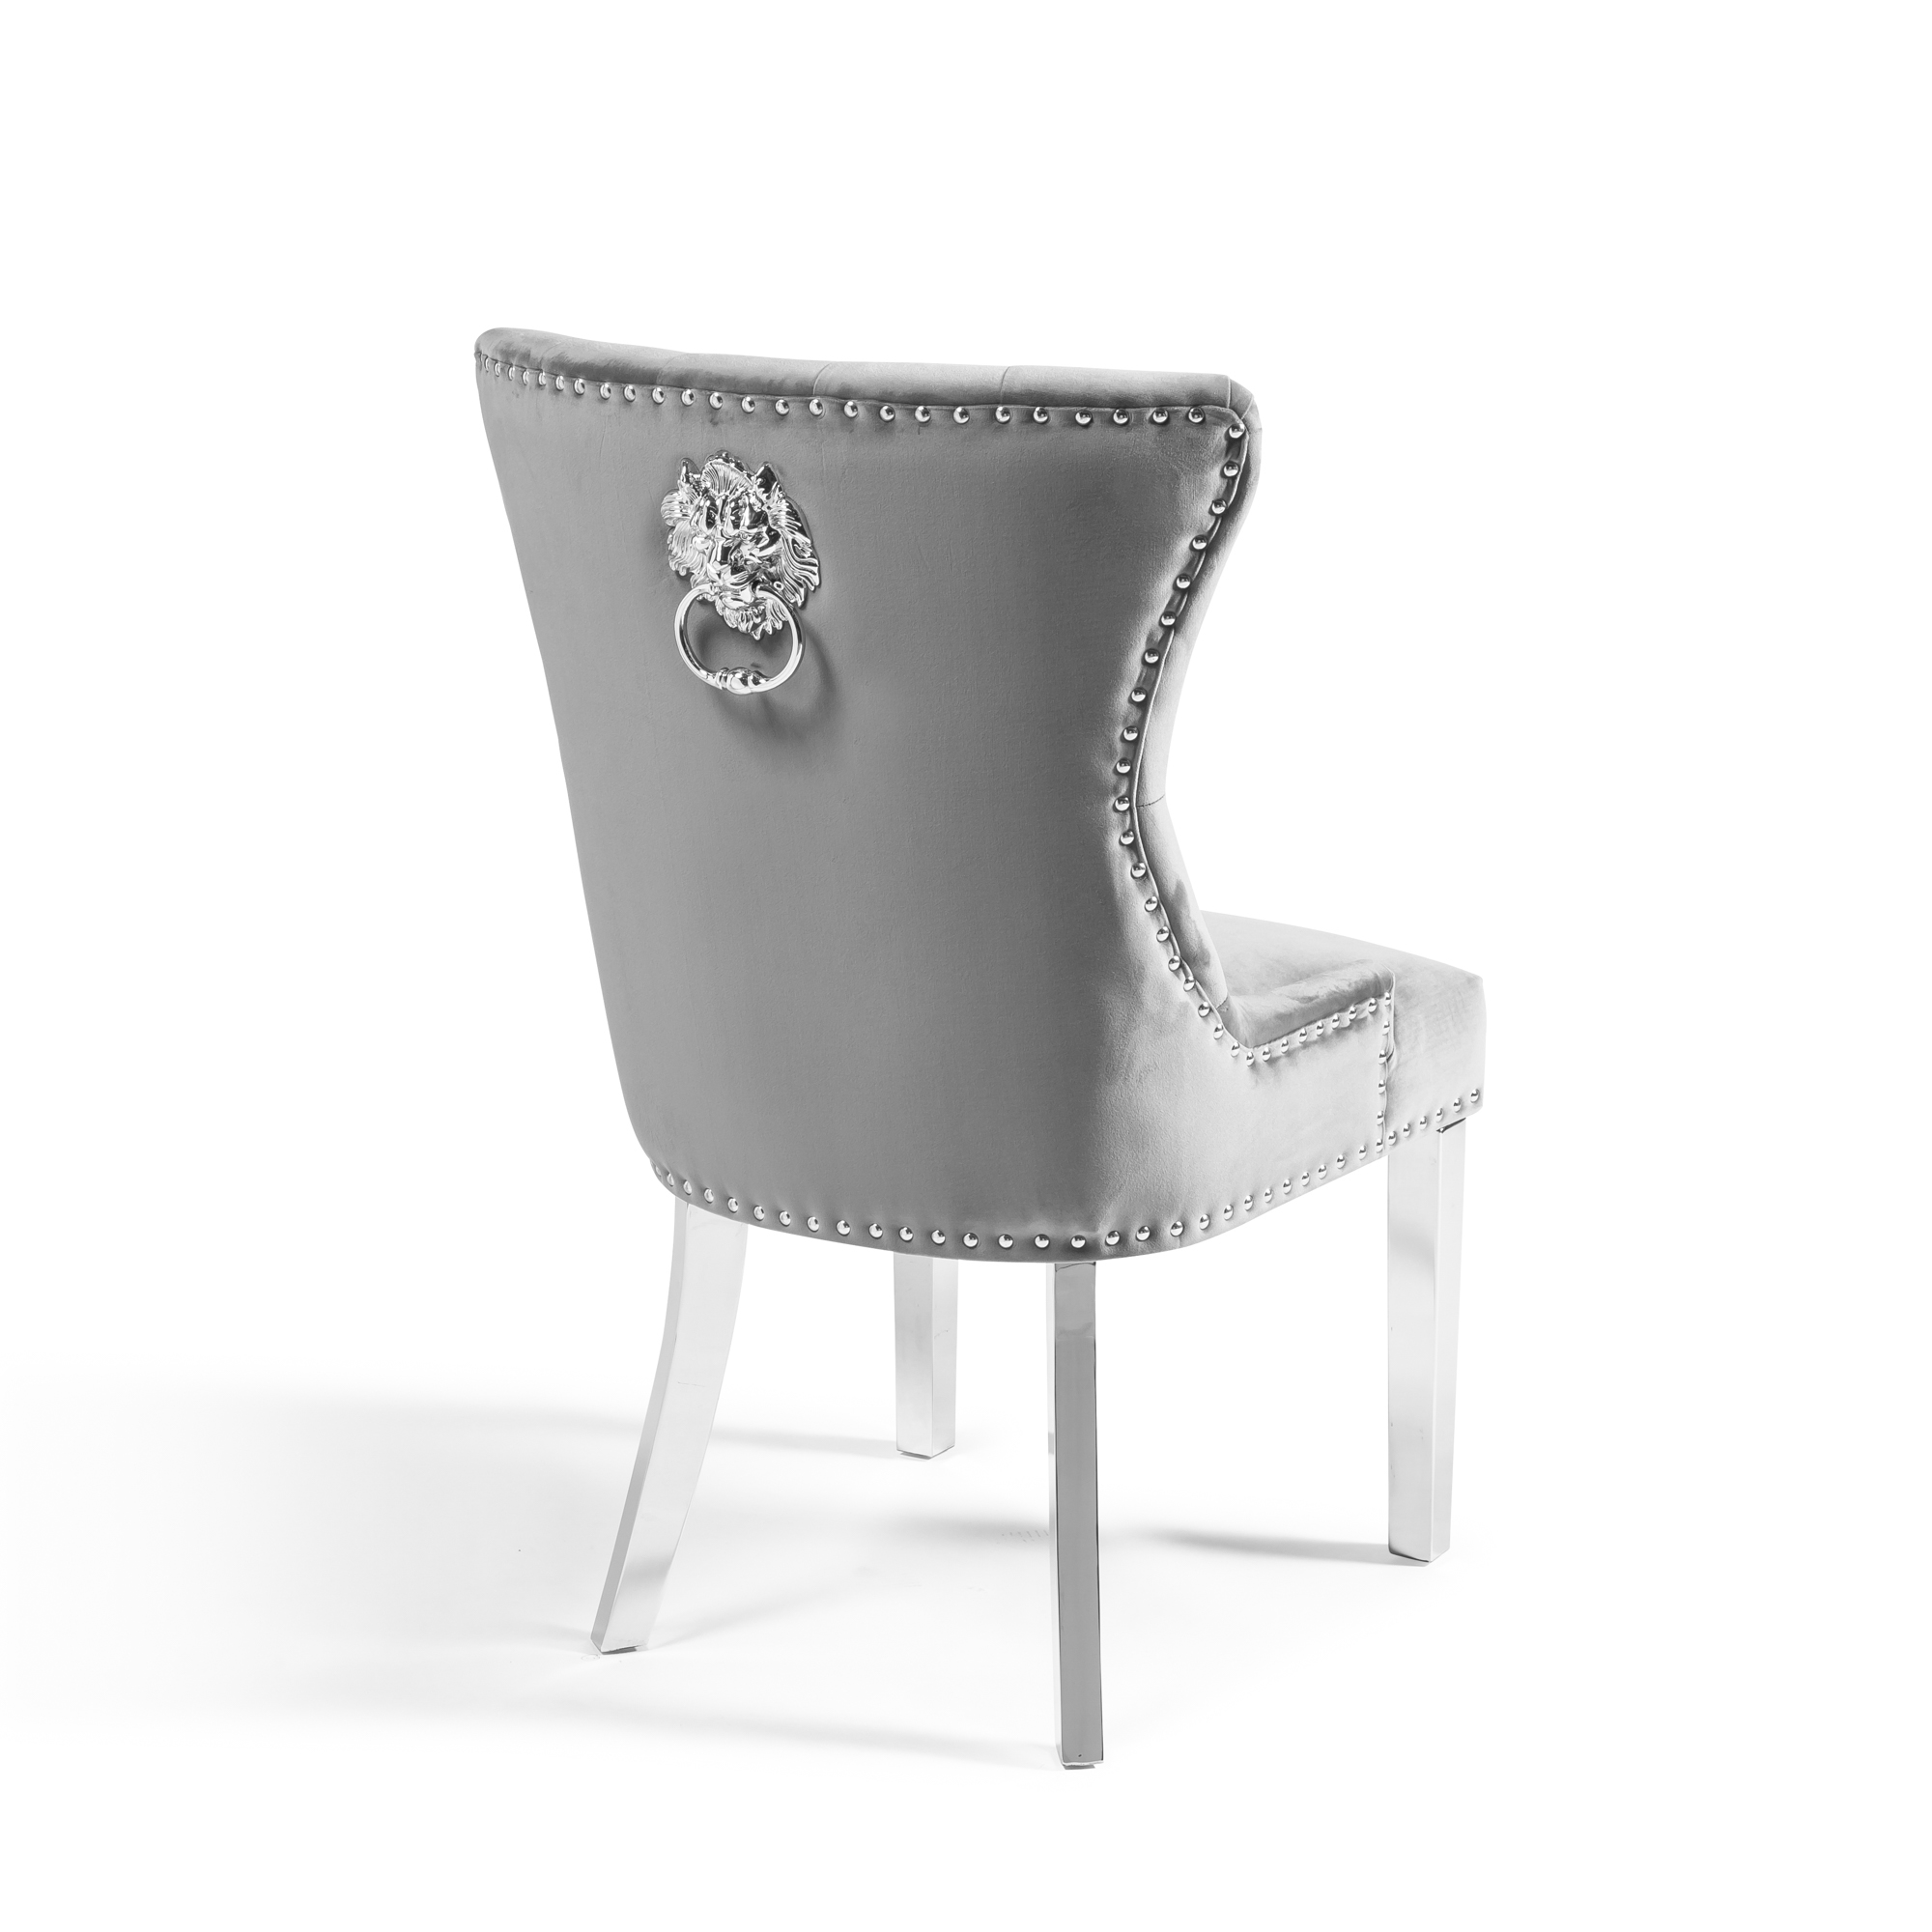 Knightsbridge Grey Velvet Dining Chair with Polished Steel Legs – Lions Head